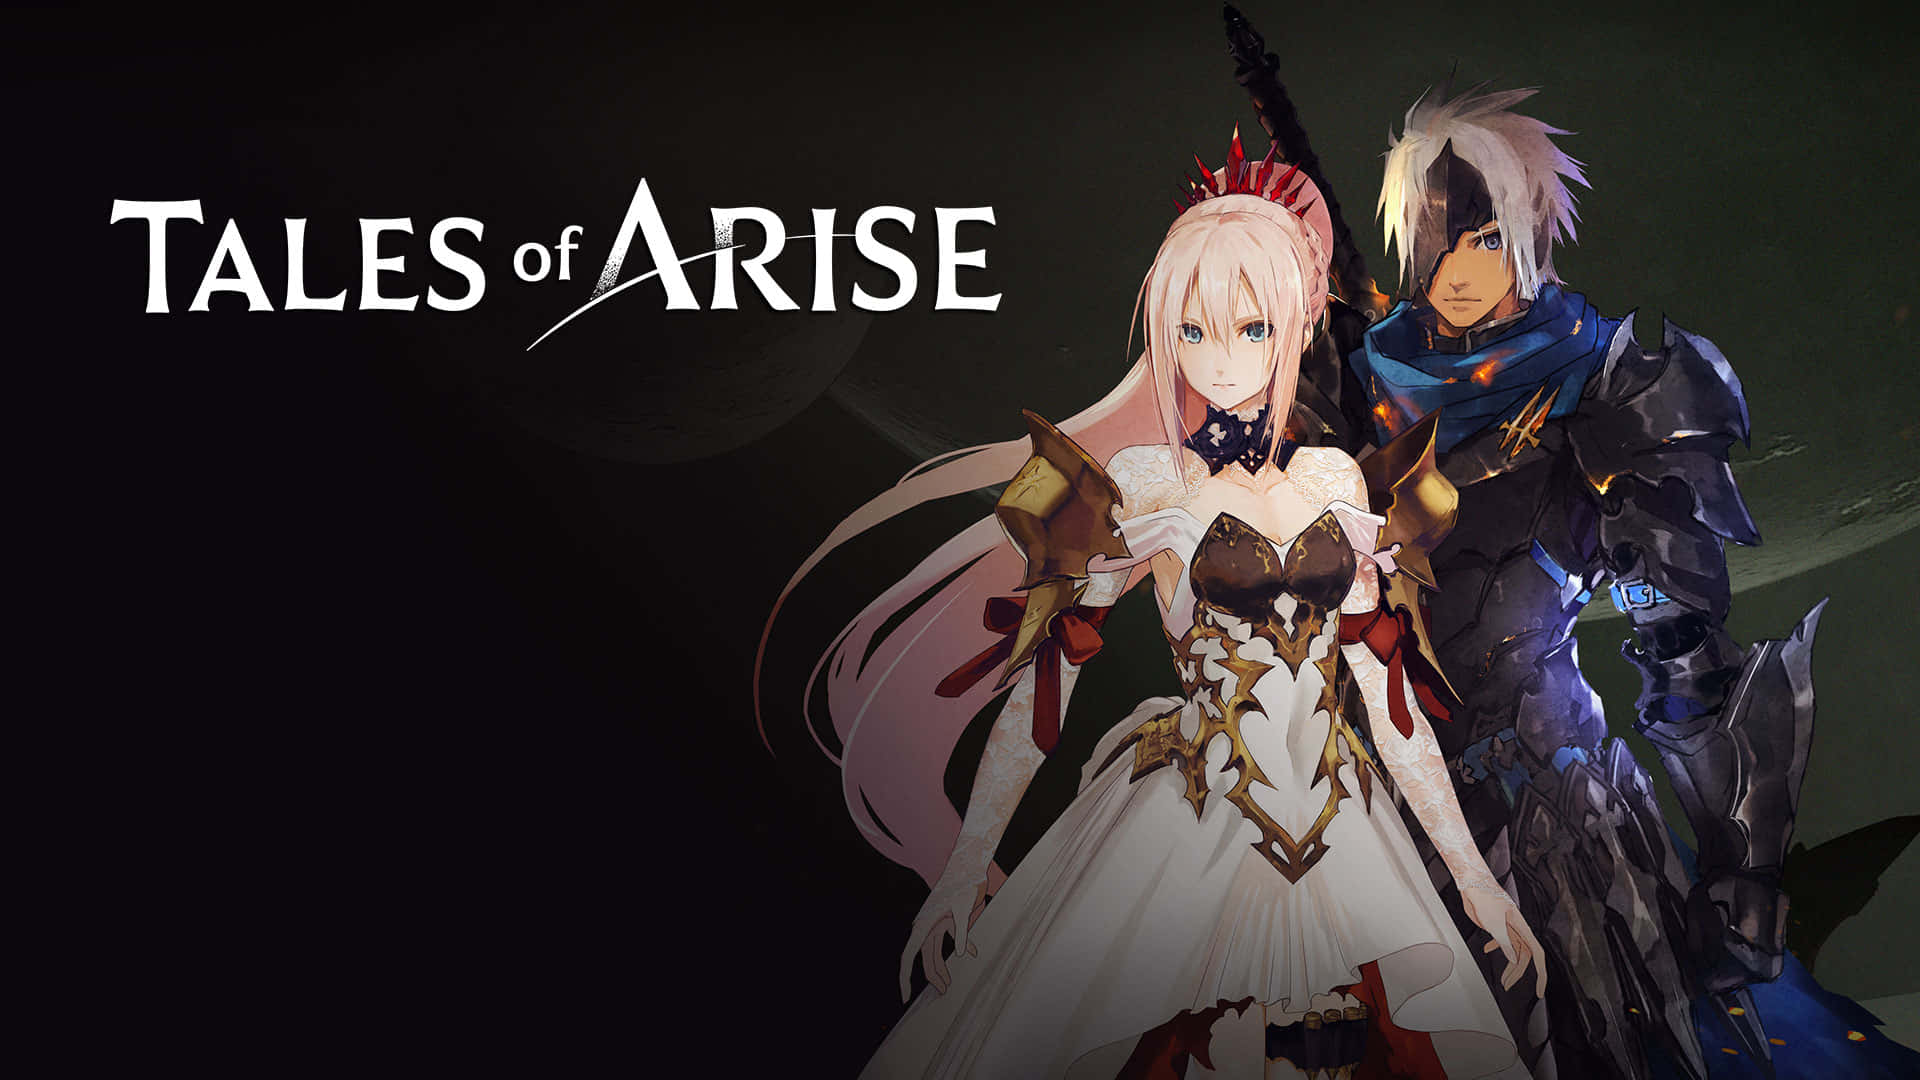 Rediscover the world of Tales of Arise with all-new experiences Wallpaper